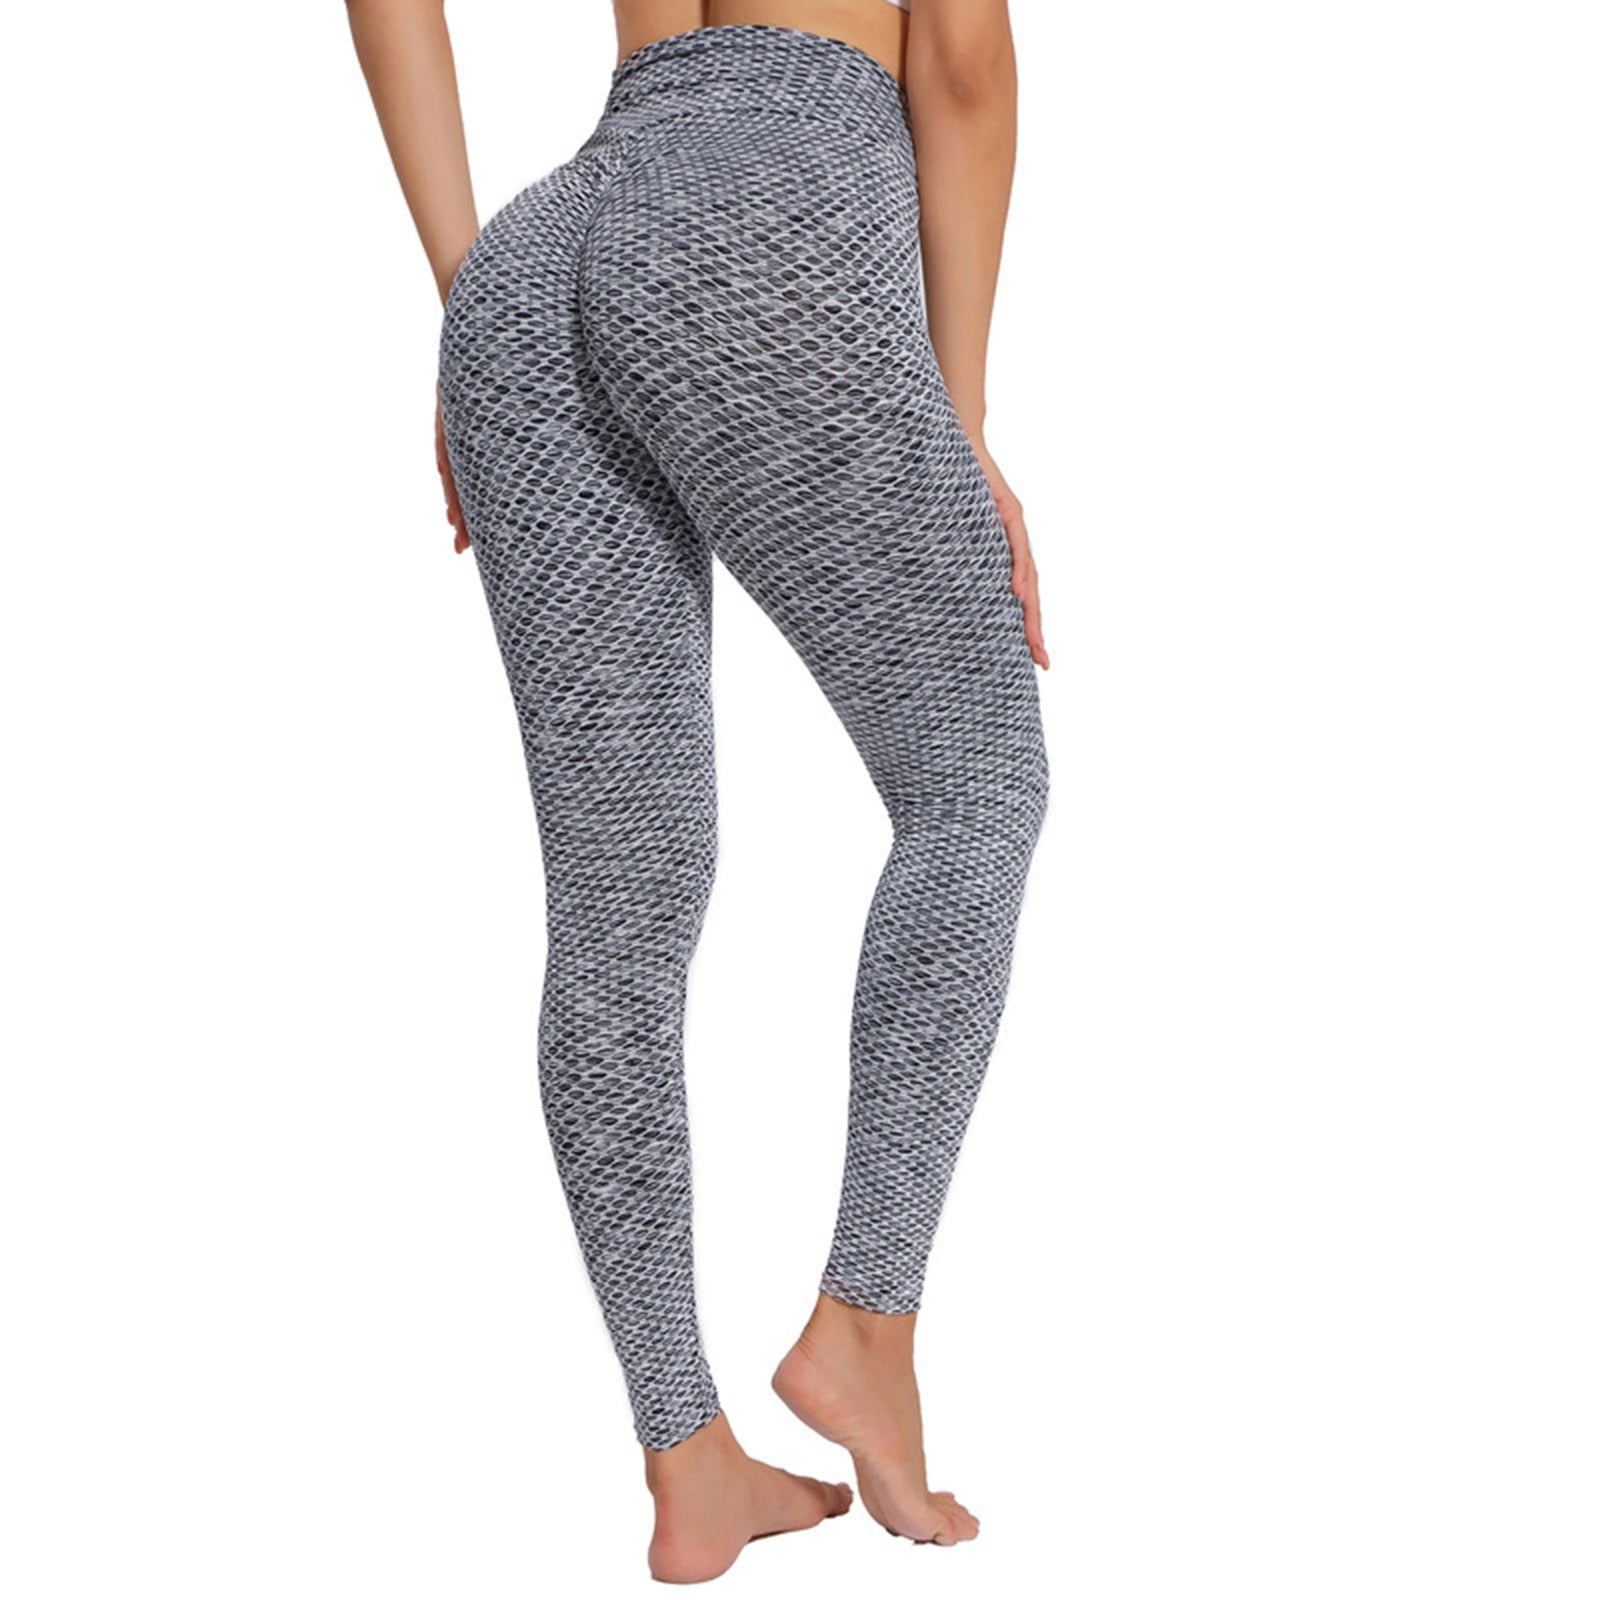 EQWLJWE Yoga Panta for Women High Waist Workout Compression Seamless  Fitness Yoga Leggings Butt Lift Active Tights Stretch Pant